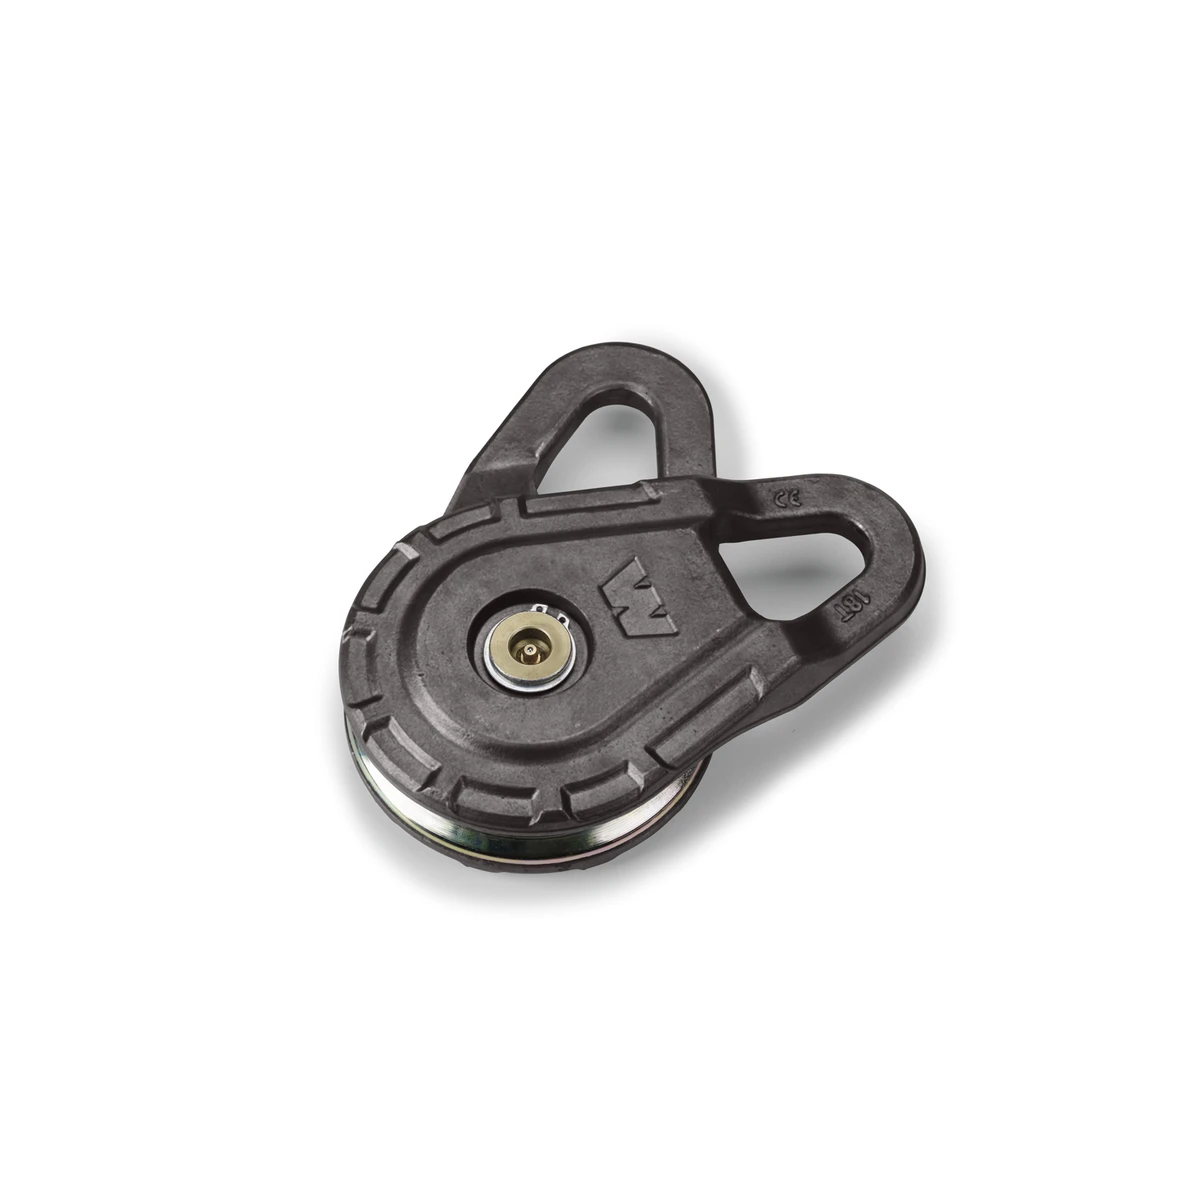 Warn EPIC Snatch Block for use with up to 18k winch